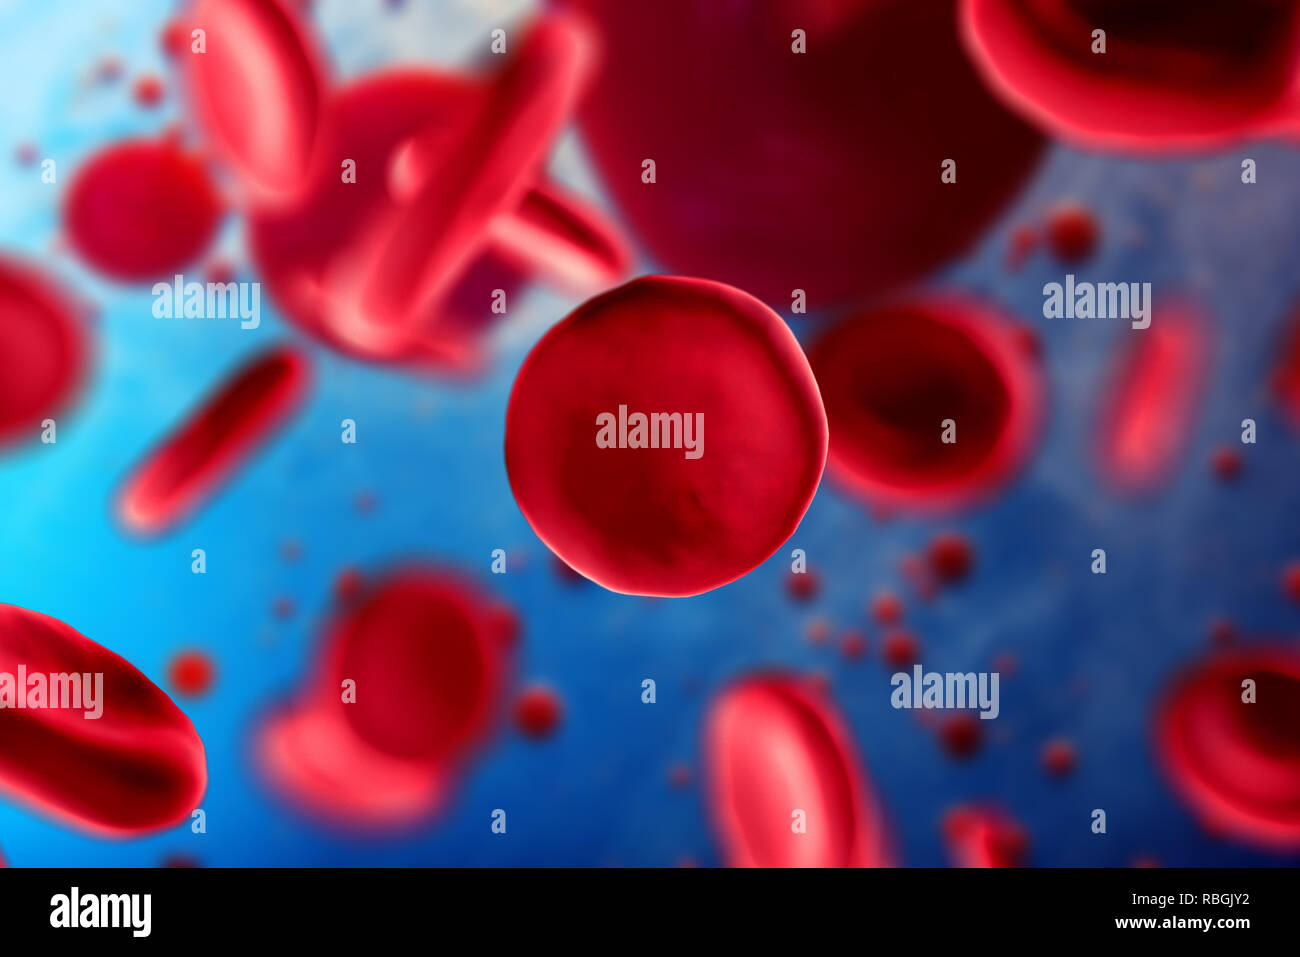 3d illustration of red blood cells erythrocytes close-up under a microscope.  Background for scientific medical concept Stock Photo - Alamy